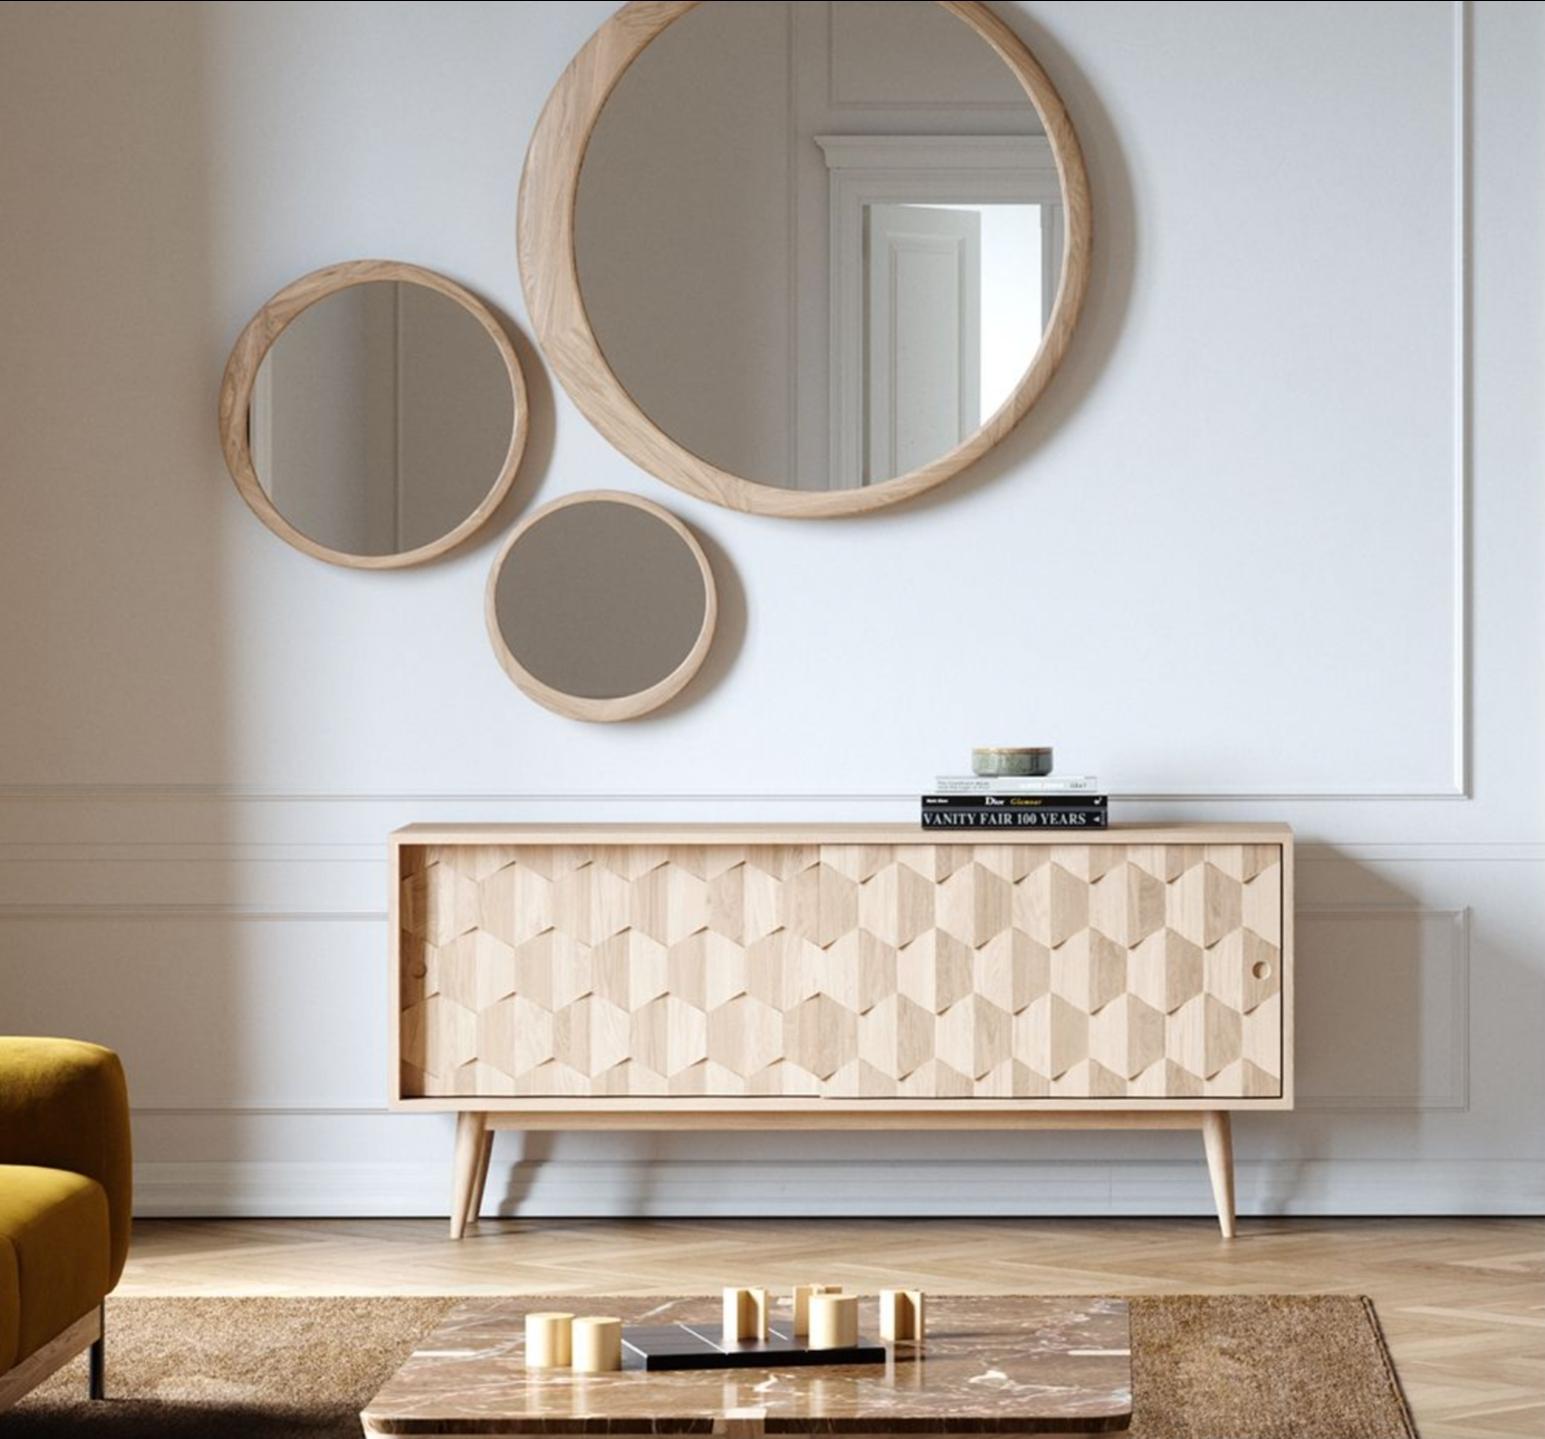 Crafted from high-quality and certified materials, his gorgeous sculptural Oak sideboard emphasizes the traditional joinery techniques.

With the structure and interiors in 100% solid wood, this is a rectangular sideboard with a unique design,